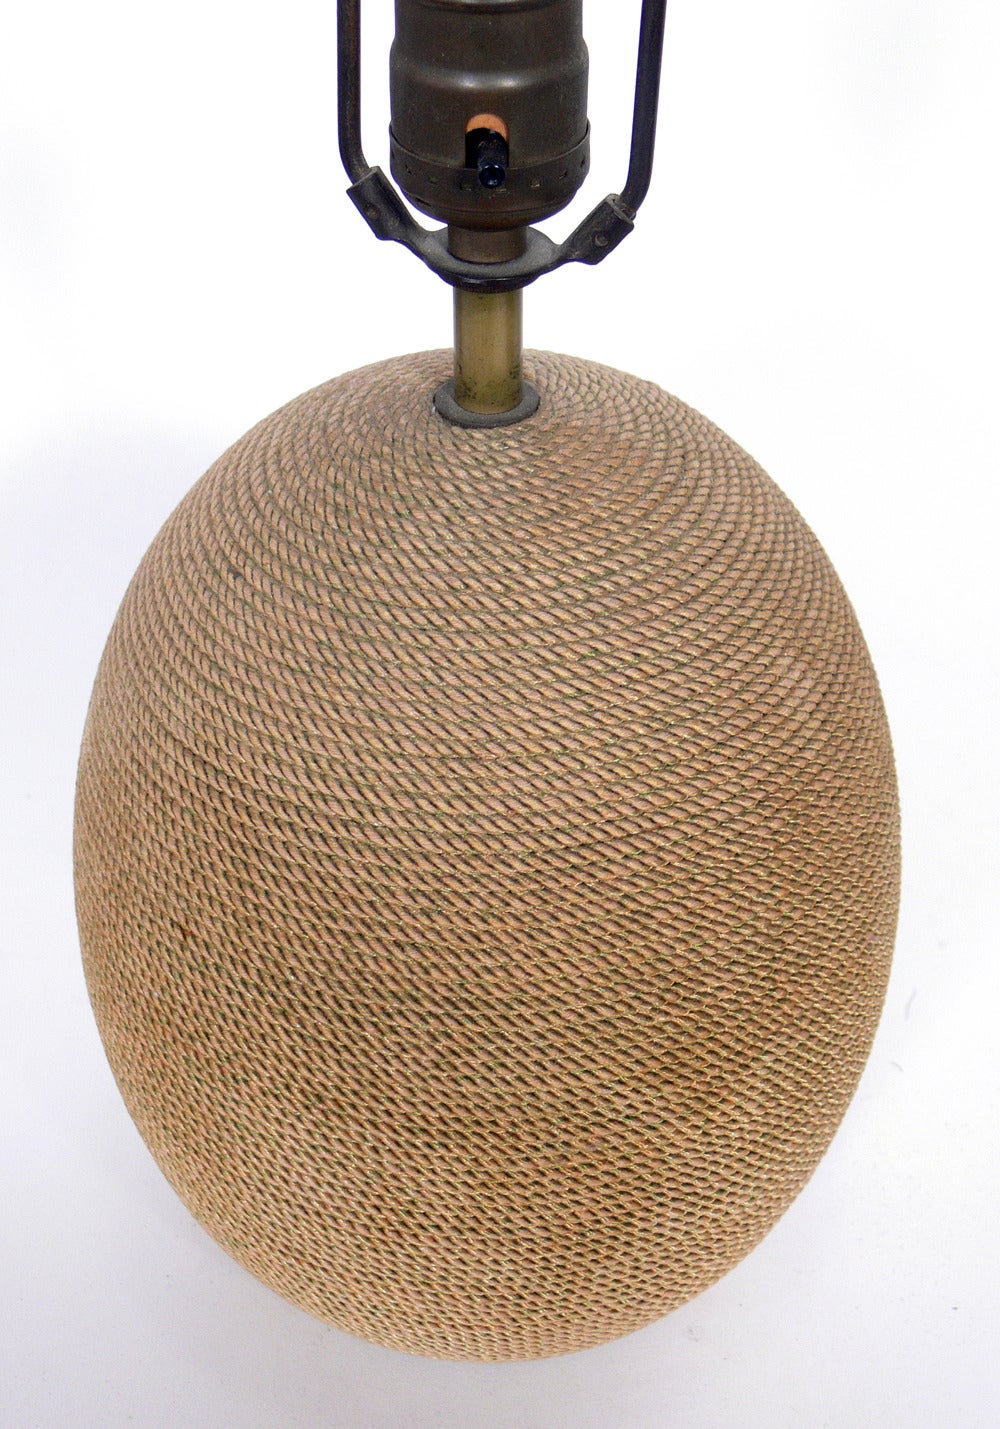 American Selection of Wood and Rope Table Lamps